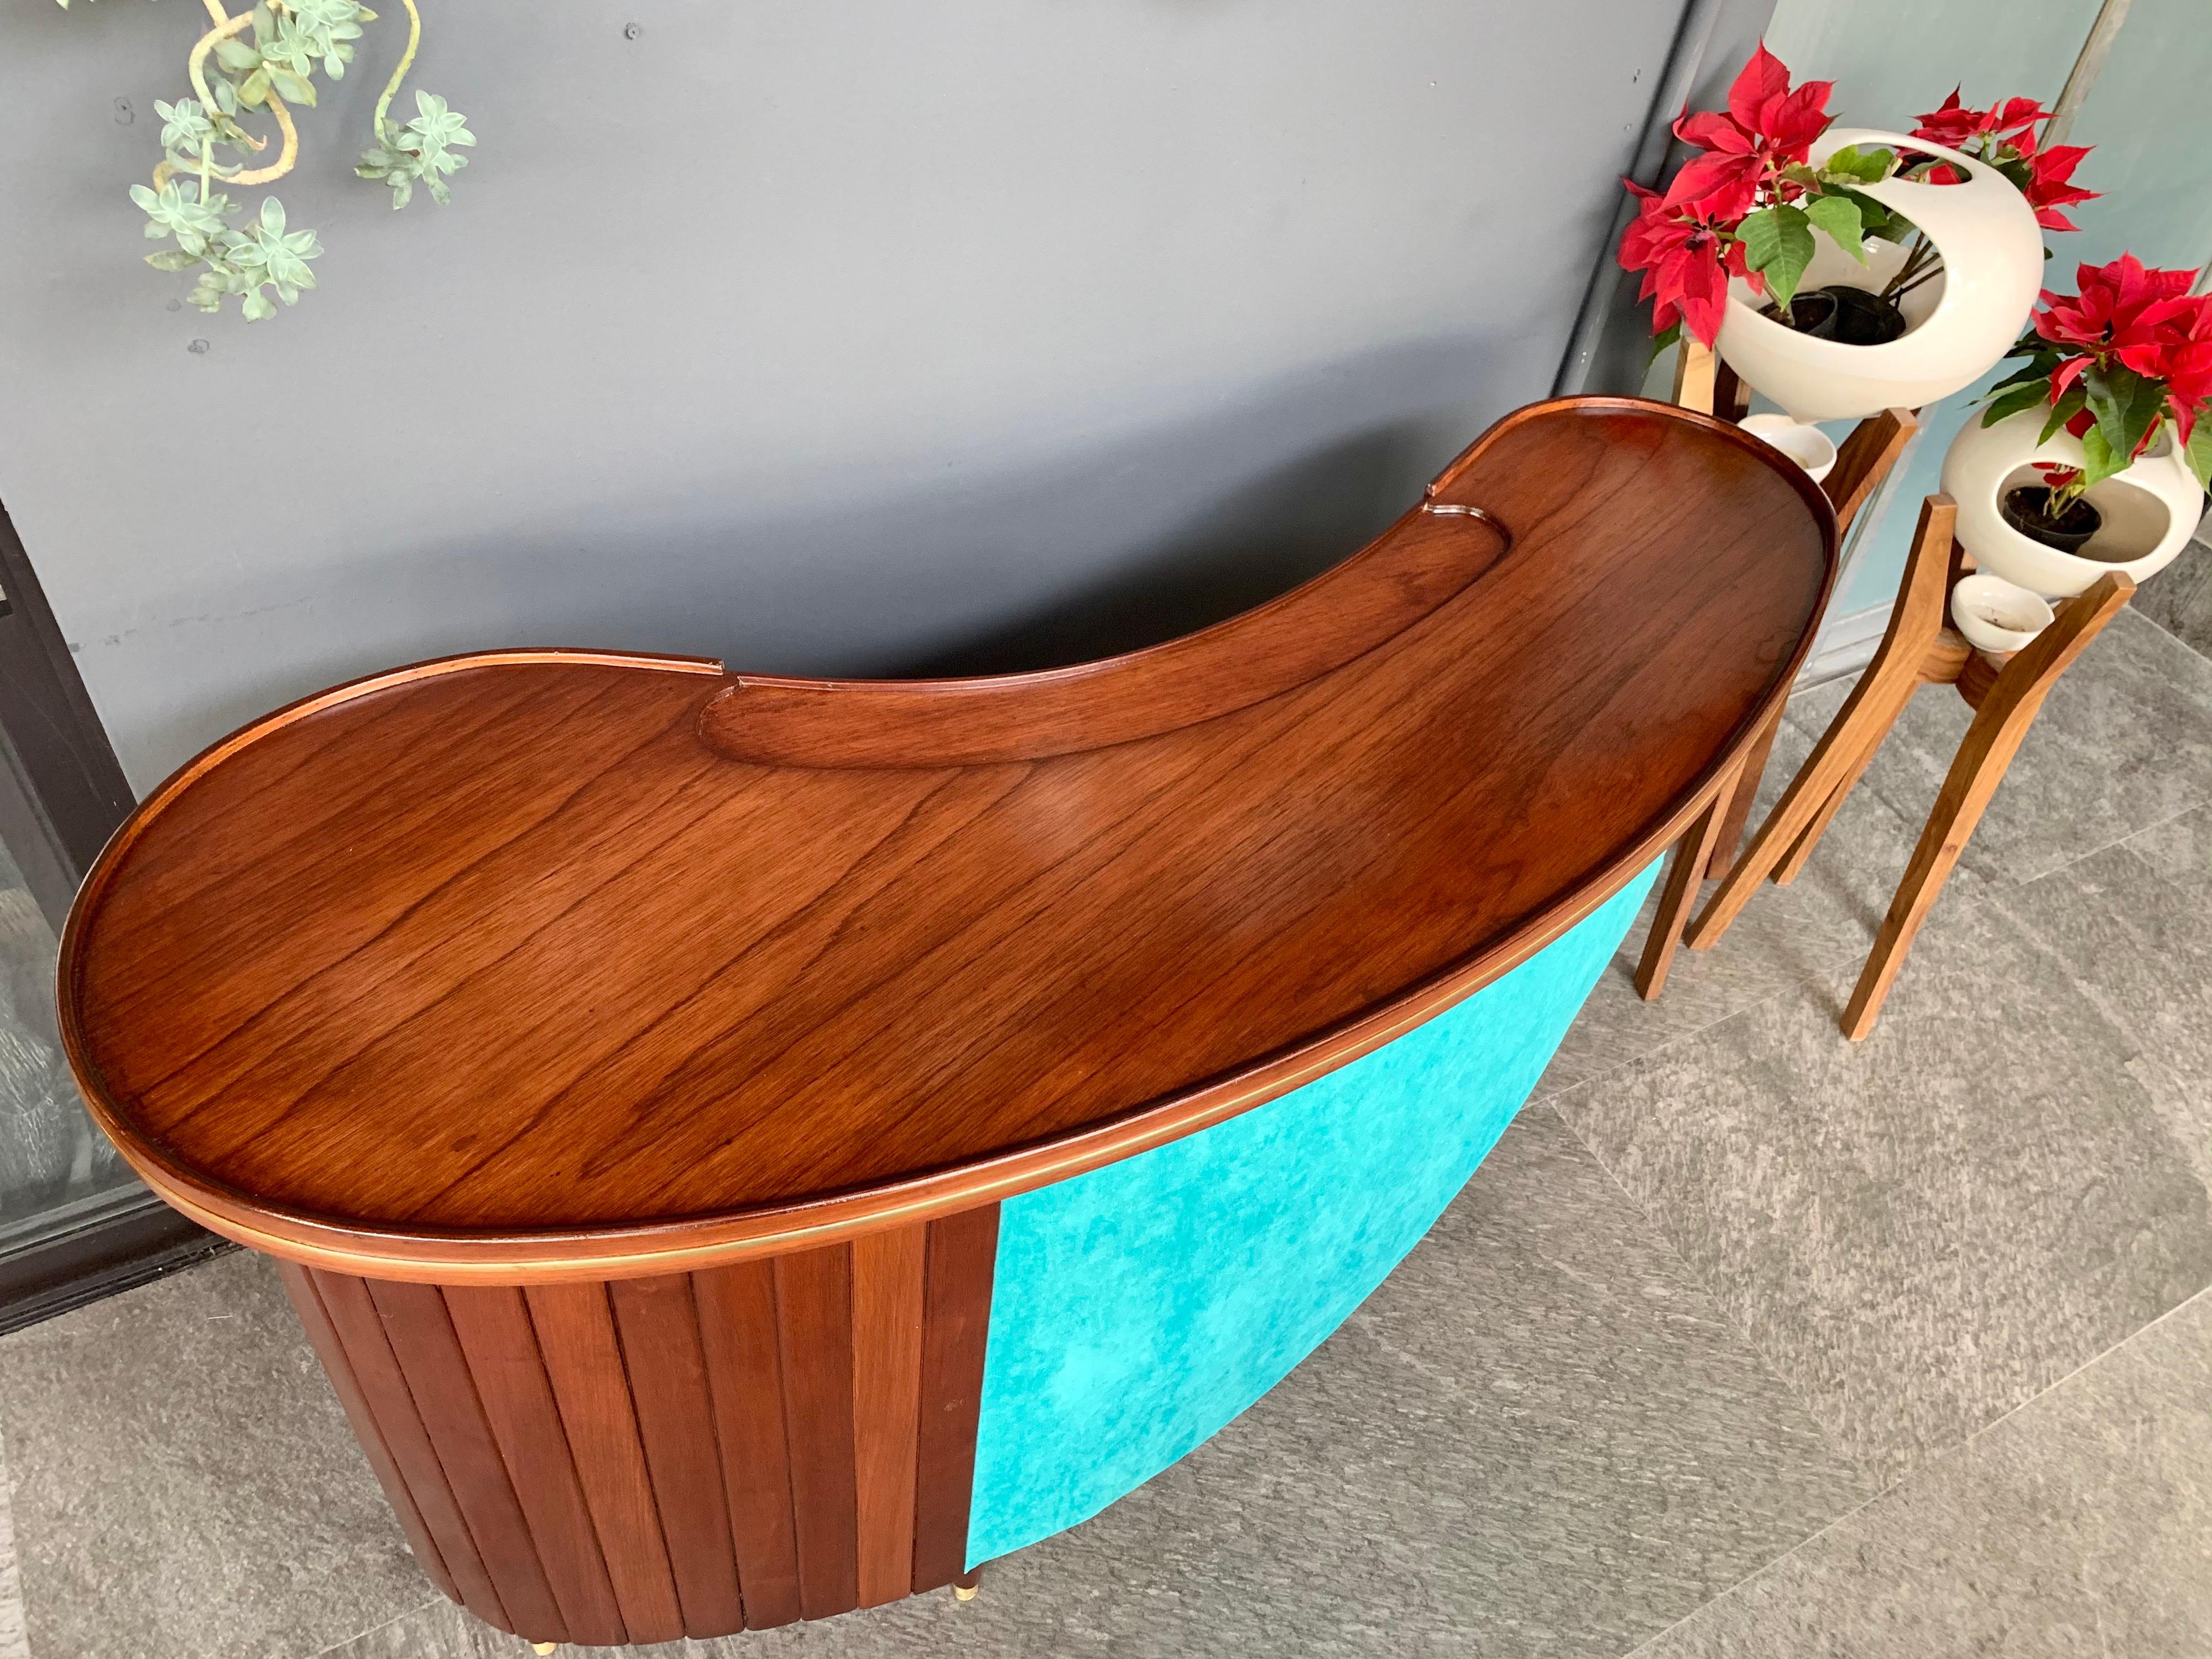 Mexican Mid-Century Modern Kidney Shaped Bar